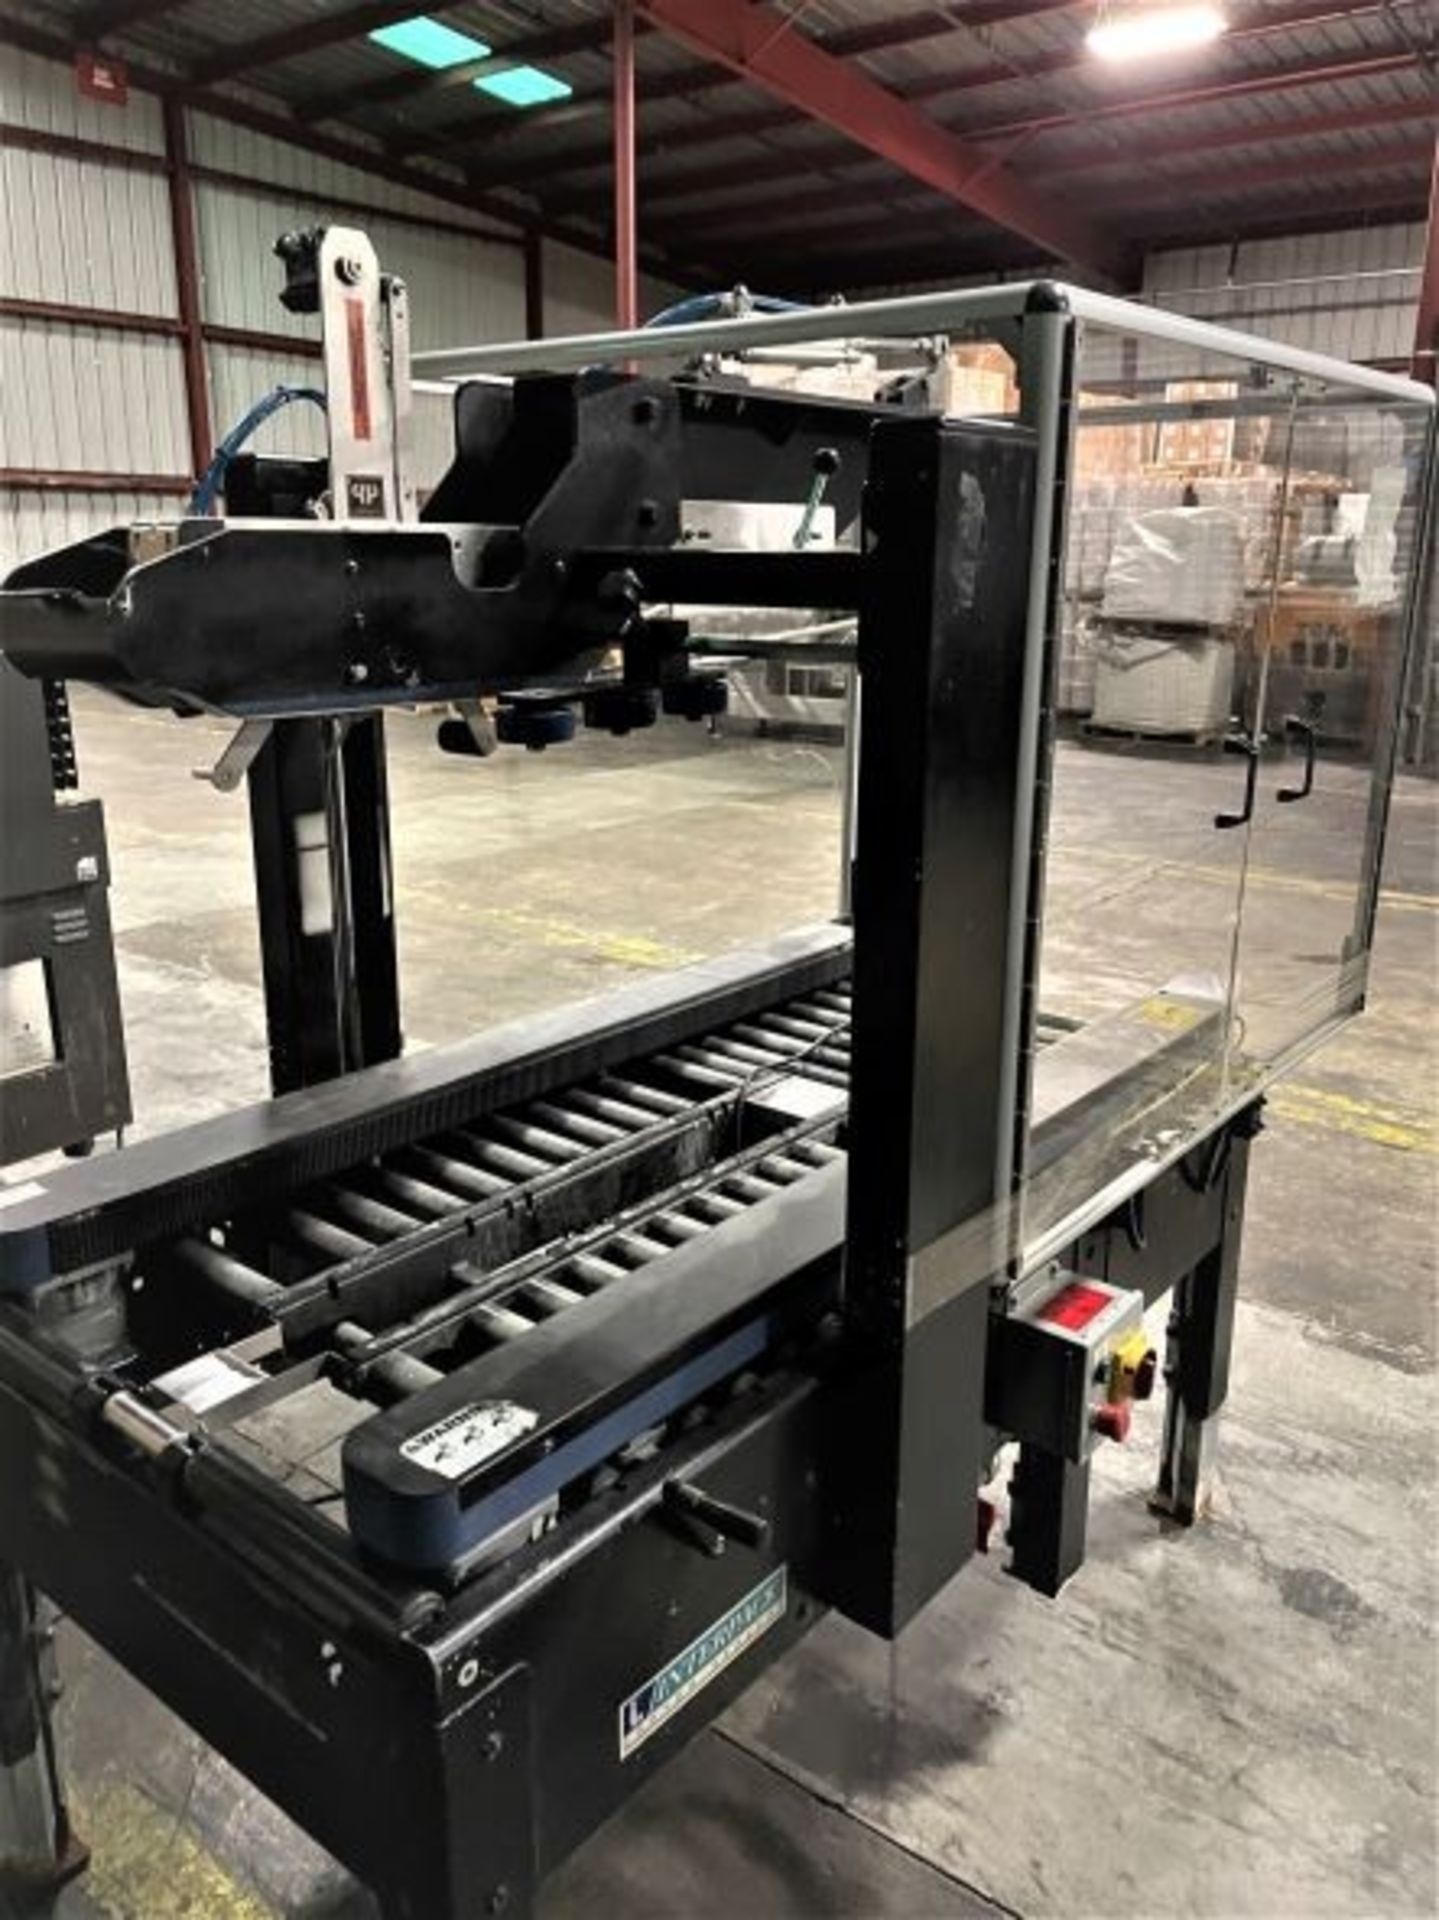 Interpack Top and Bottom Case Sealer Taper, Model UA 262024-B, S/N TM09511 E 001 with Autoflap, - Image 7 of 8